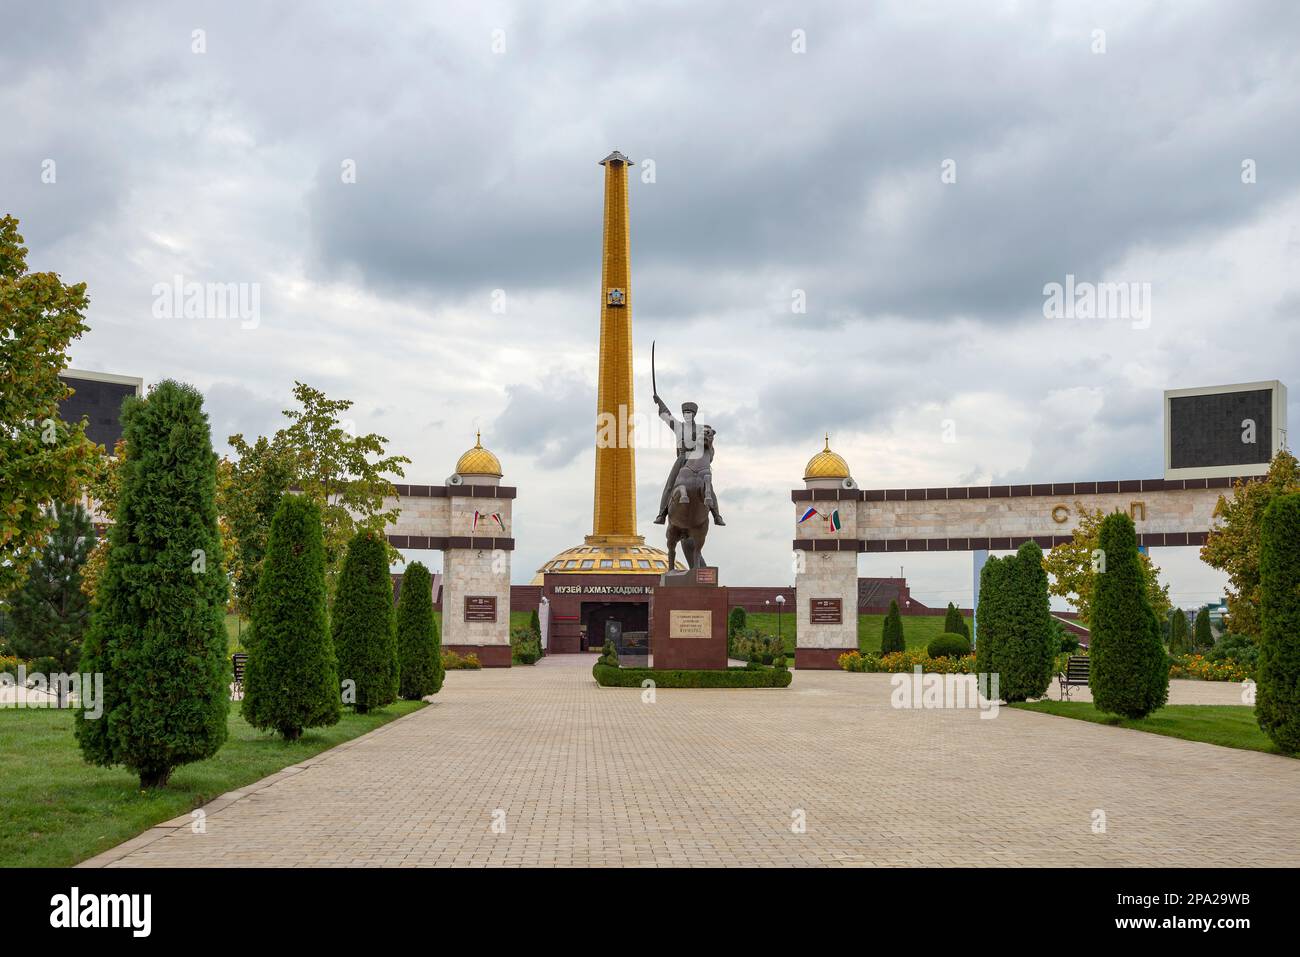 GROZNY, RUSSIA - SEPTEMBER 29, 2021: Monument to Mavlid Aleroyevich Visaitov in the Memorial Complex of Glory. Grozny, Chechen Republic Stock Photo